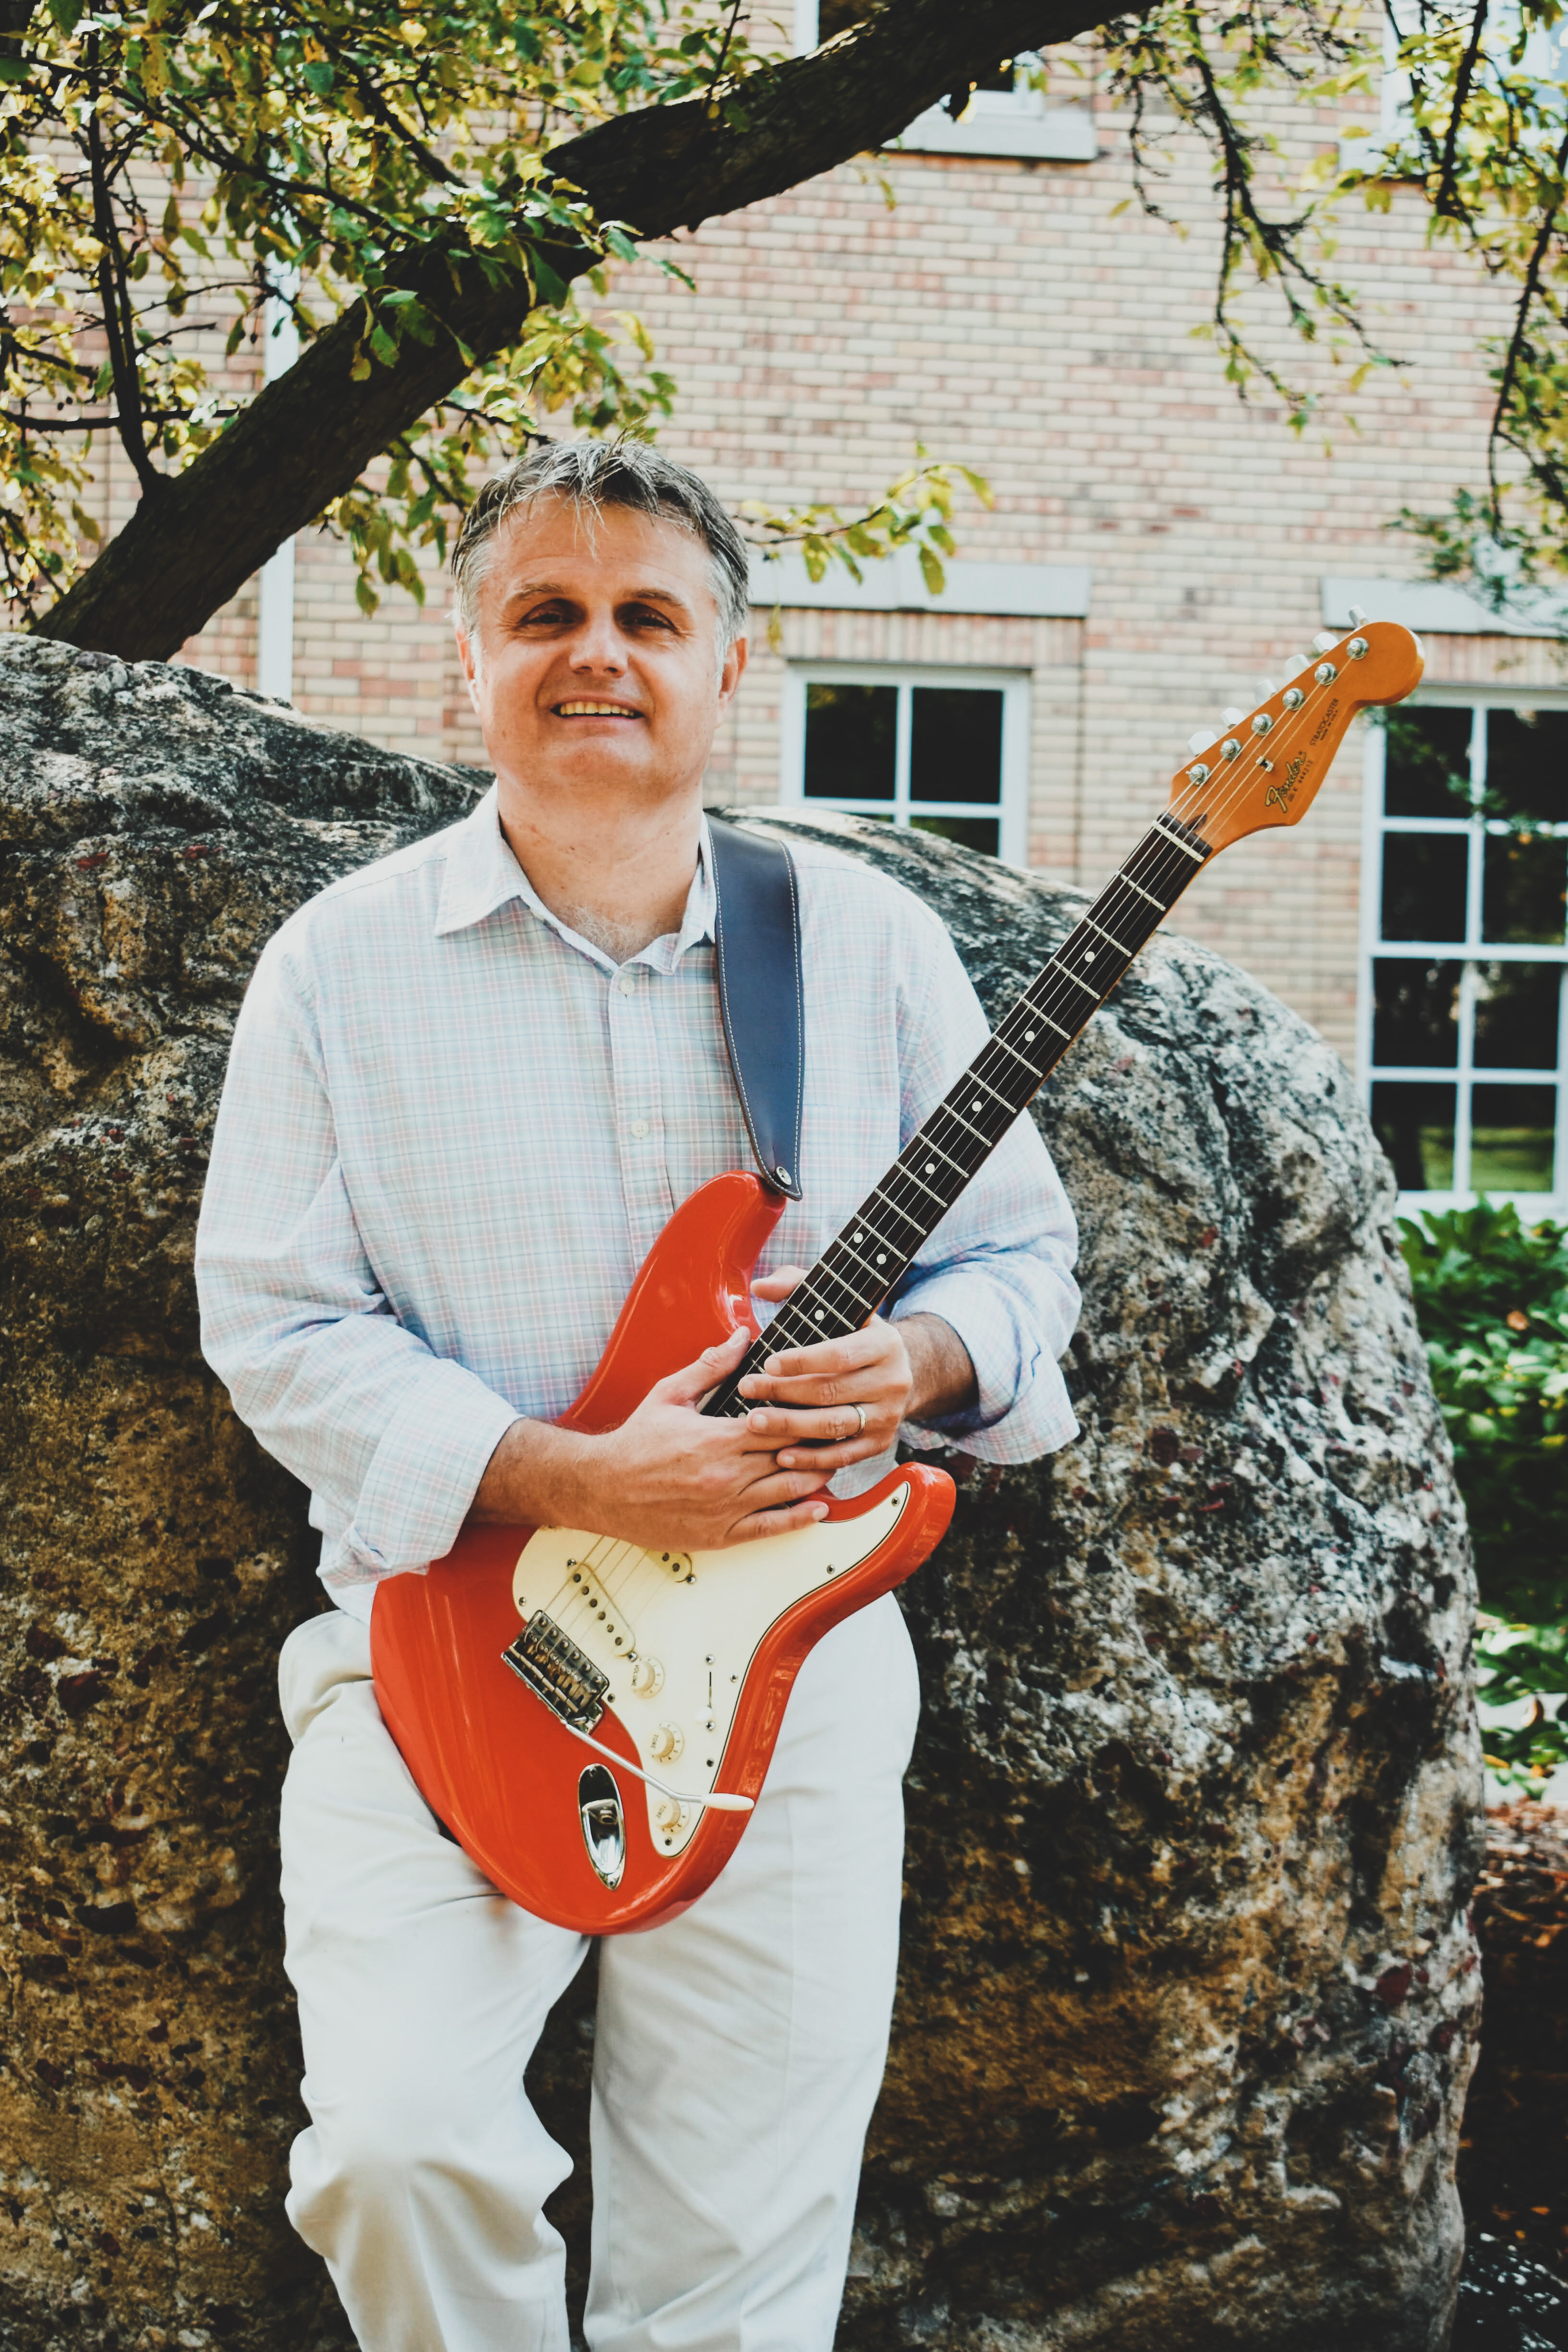 Professor honors surf music artist with new music